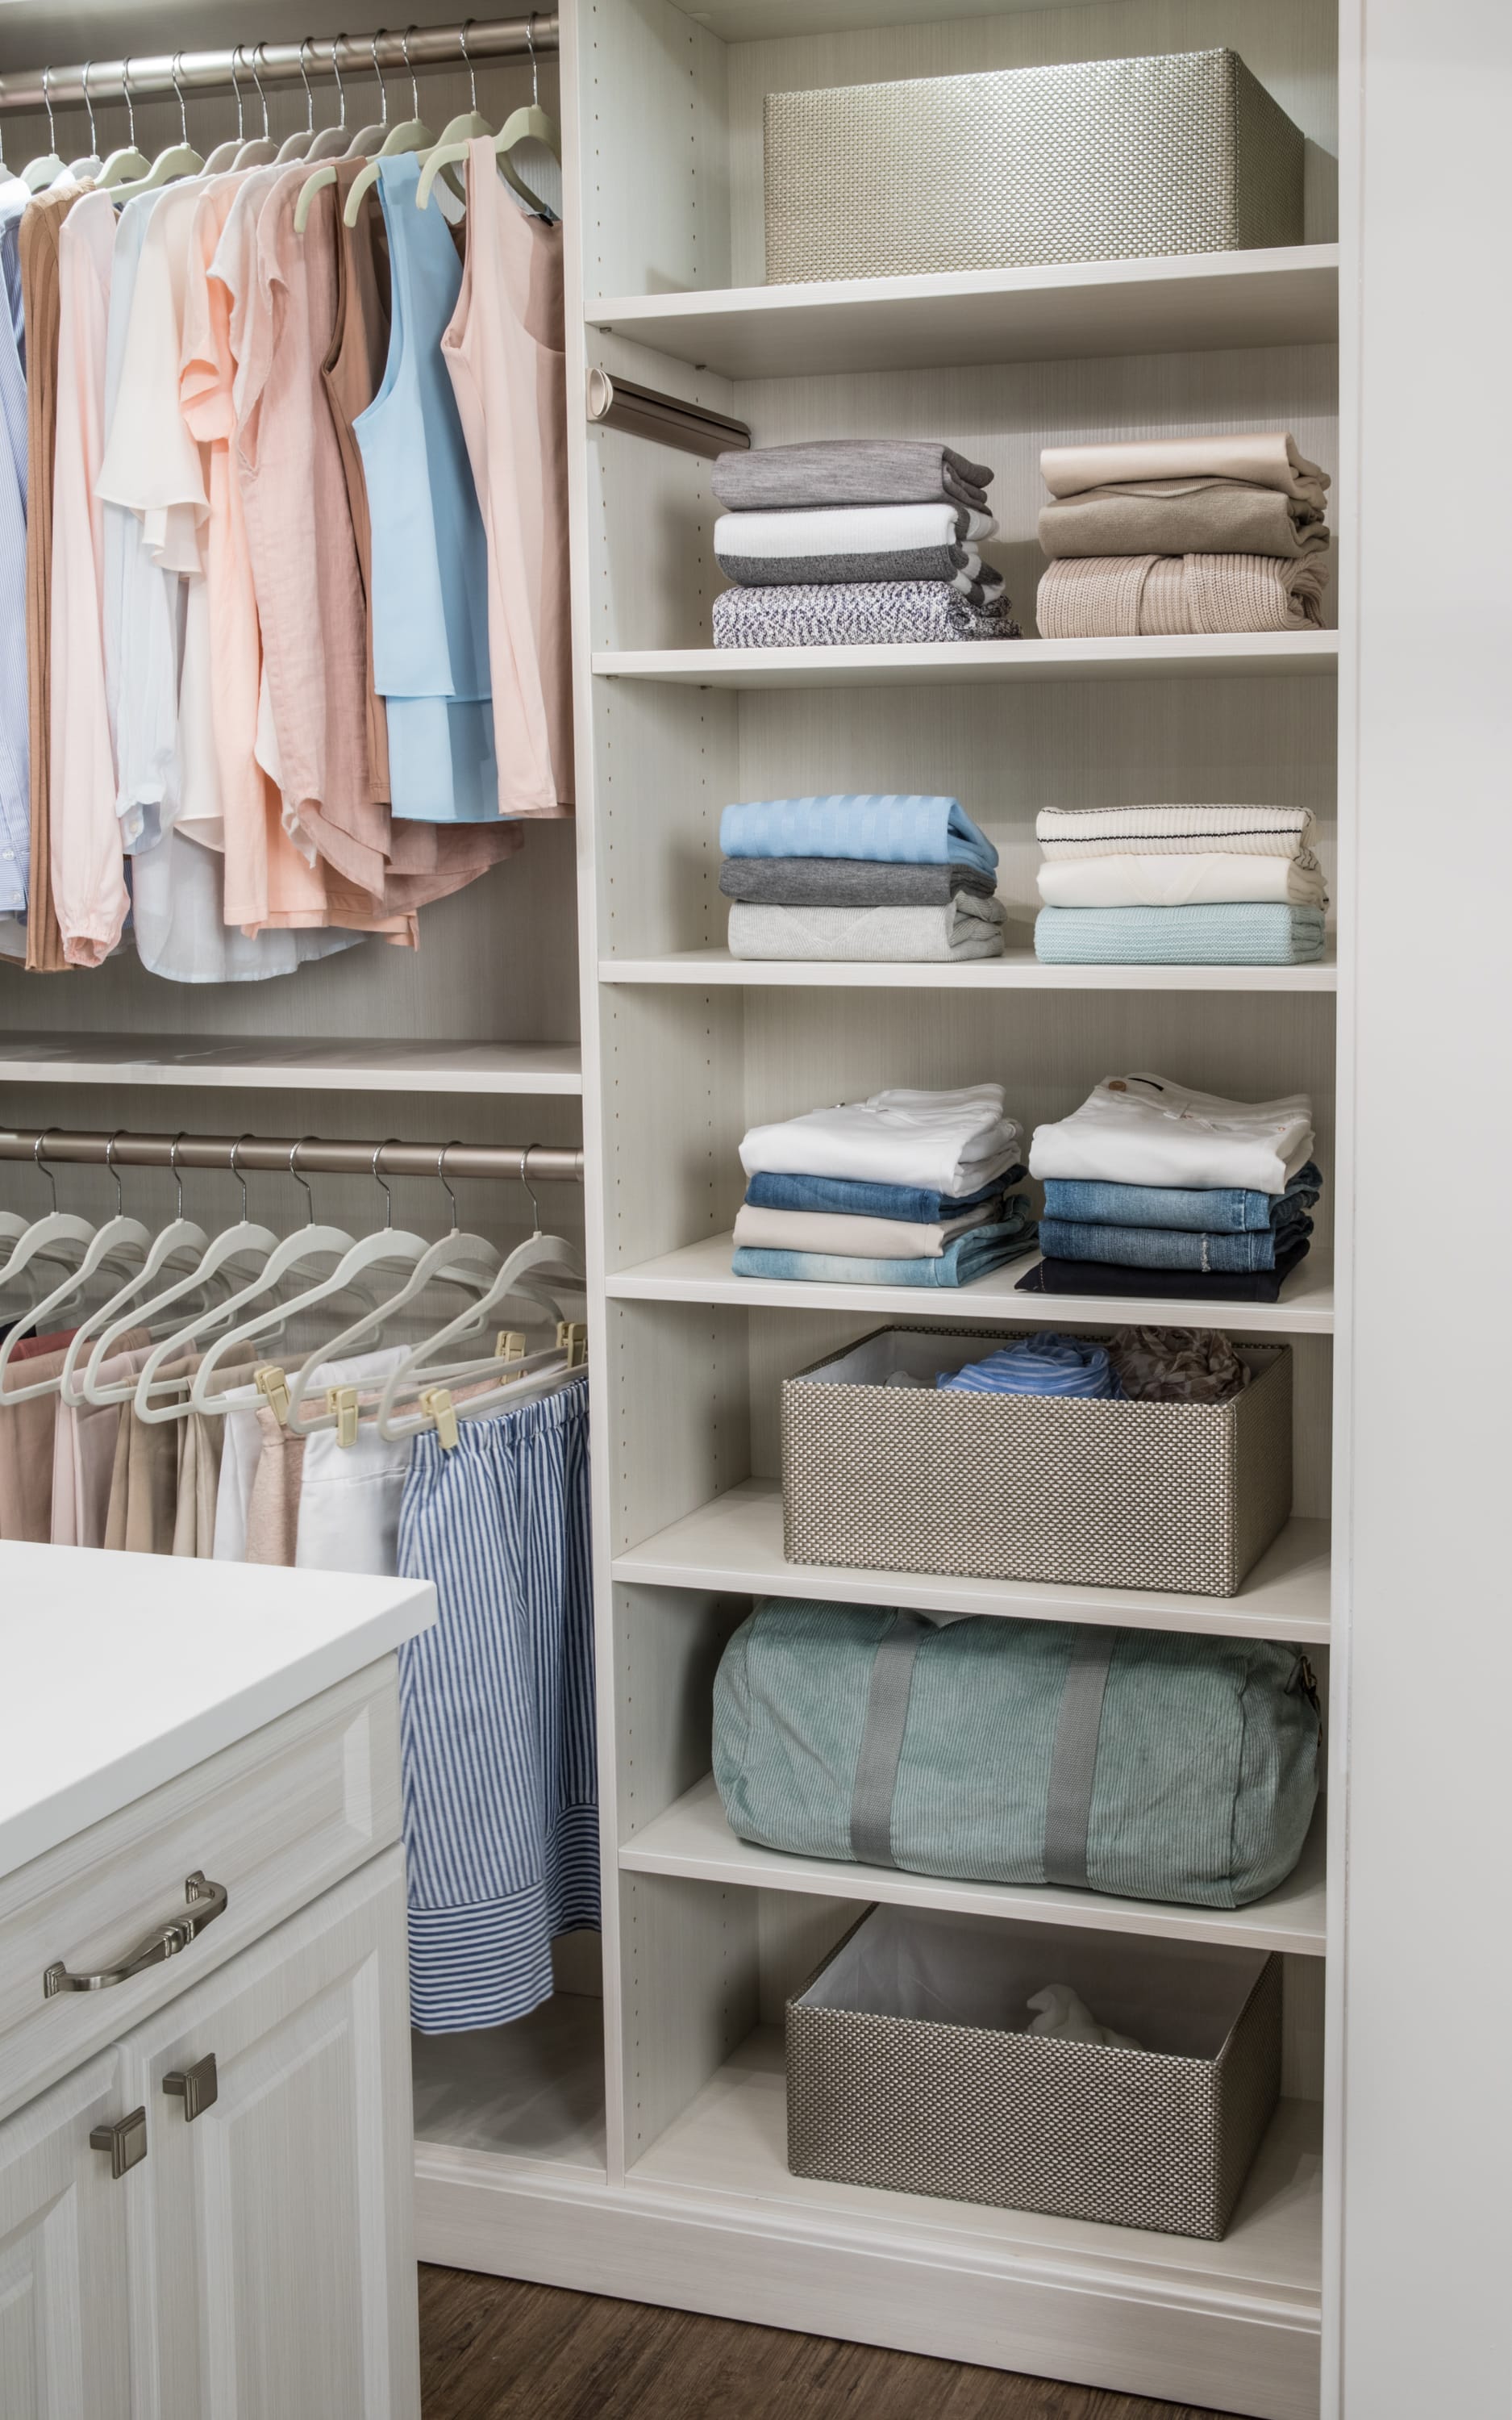 Clothes and other articles on shelves with shirts and pants hung on racks